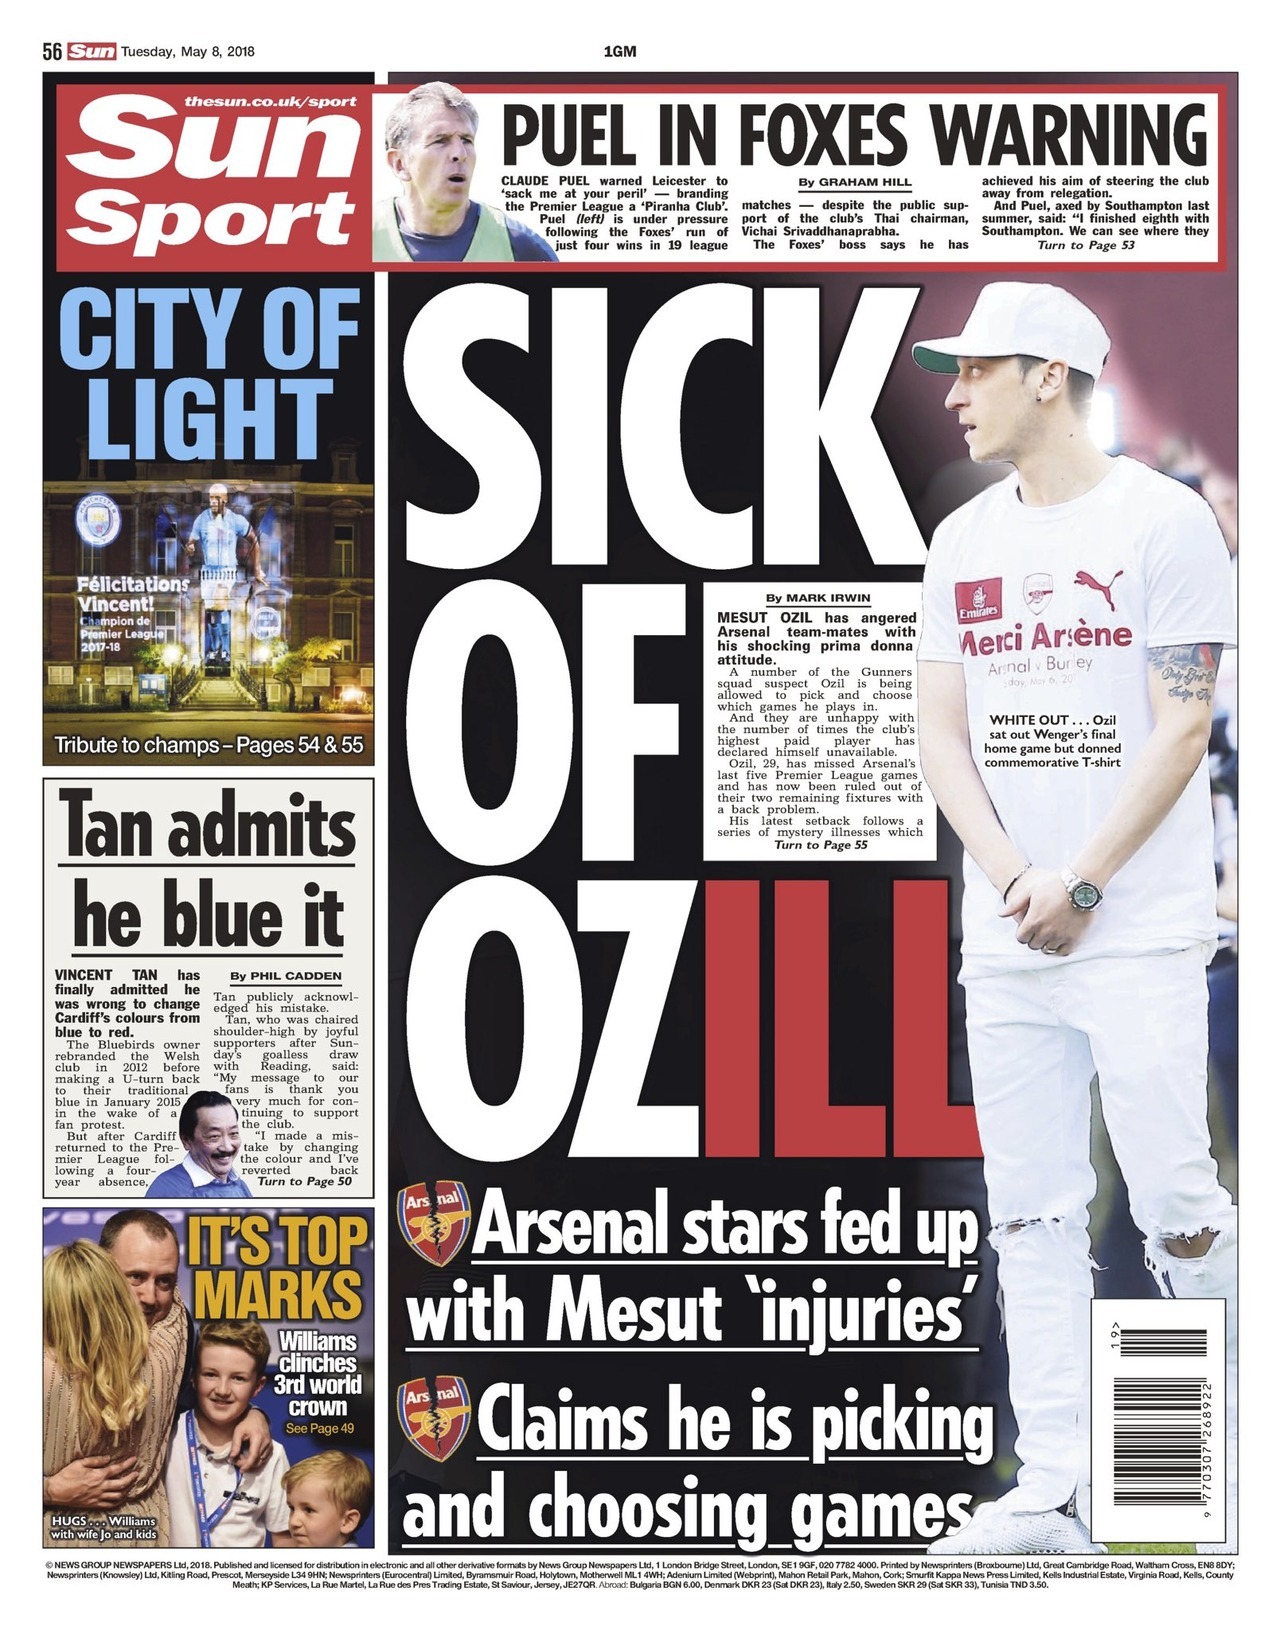 8 may 2018 sun backpage ozil